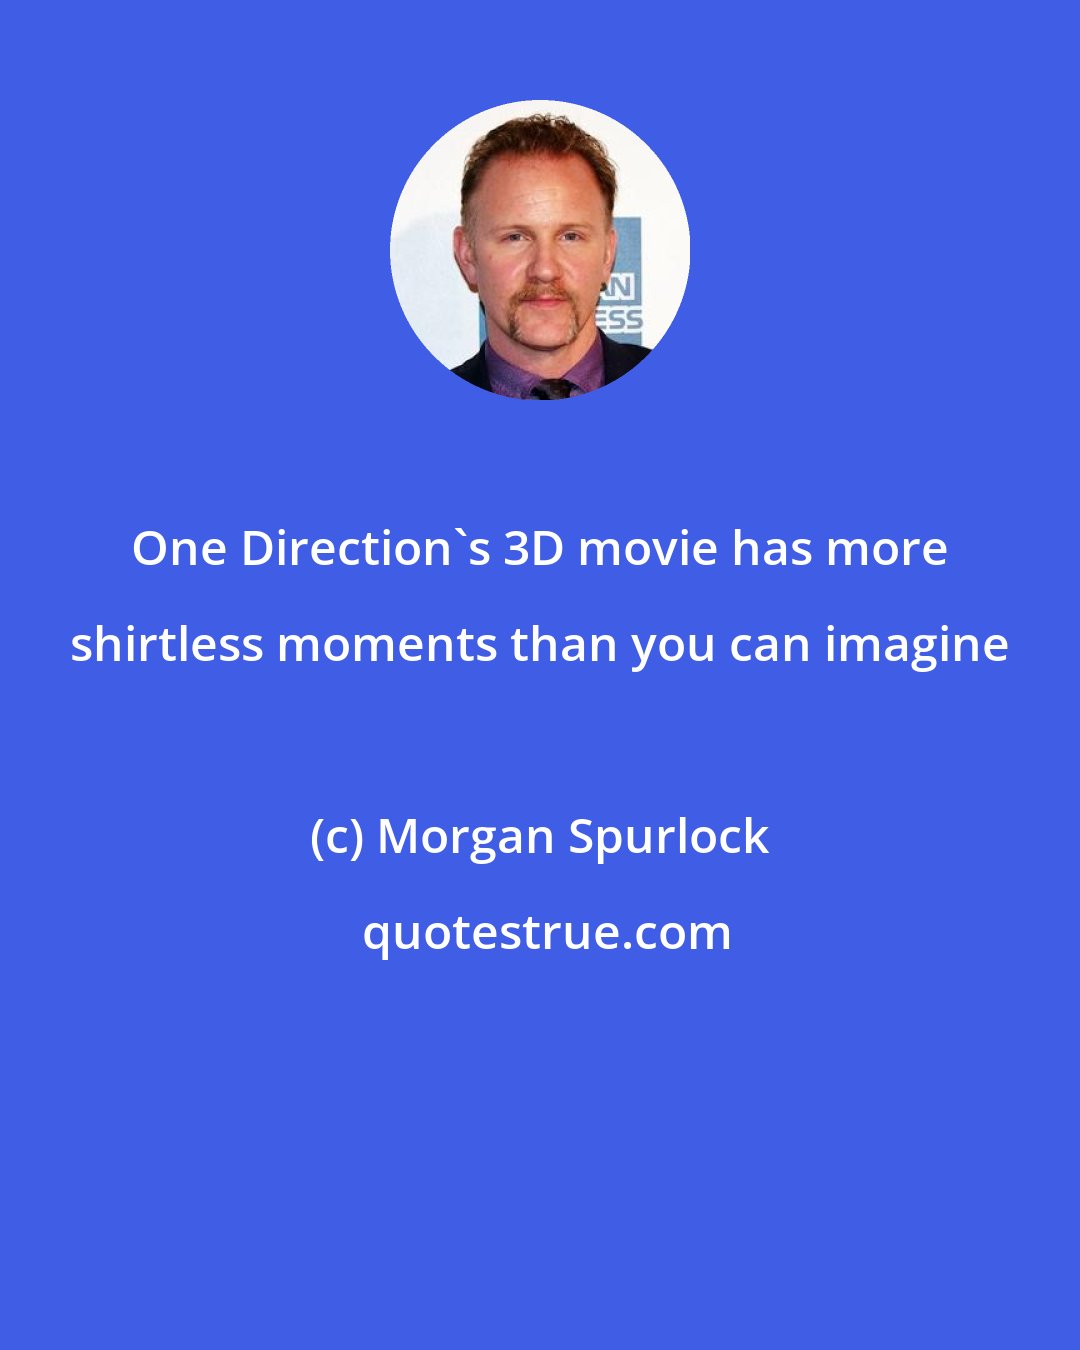 Morgan Spurlock: One Direction's 3D movie has more shirtless moments than you can imagine